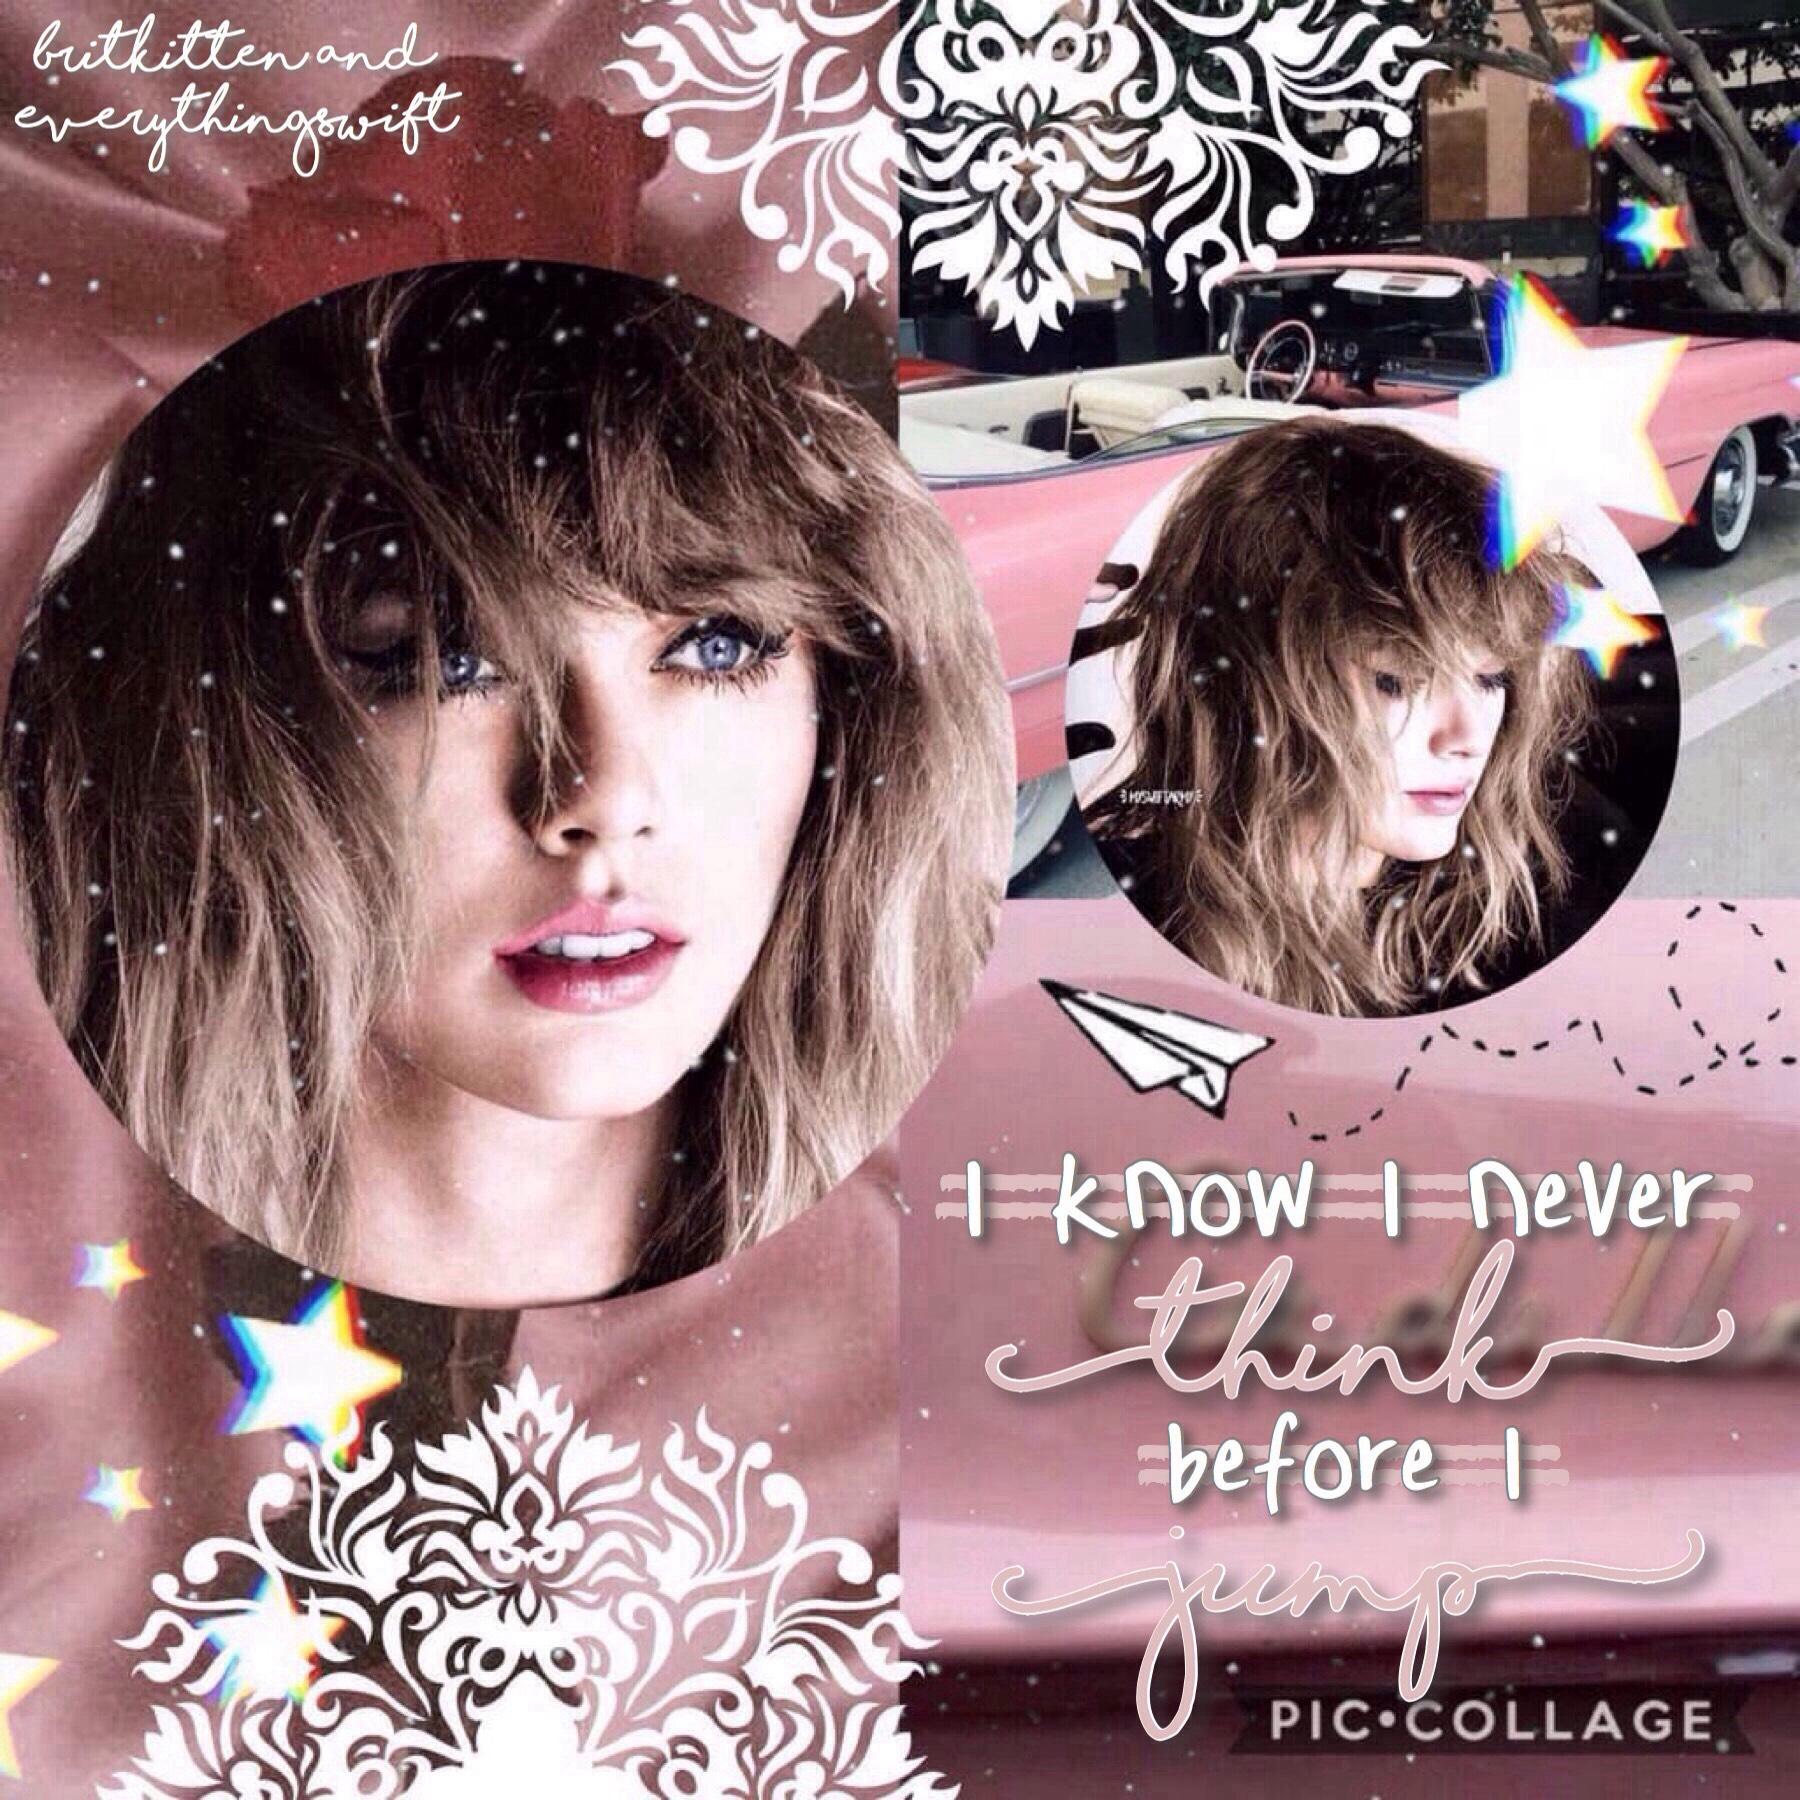 ✰ t a p  f o r  c o l l a b ✰  
collab with my bestie _britkitten_
don't forget to enter my contest -->
qotd: thoughts on the taylor swift news?
aotd: AHHH I'M JUST SO EXCITED!
^if u don't understand look in remixes
